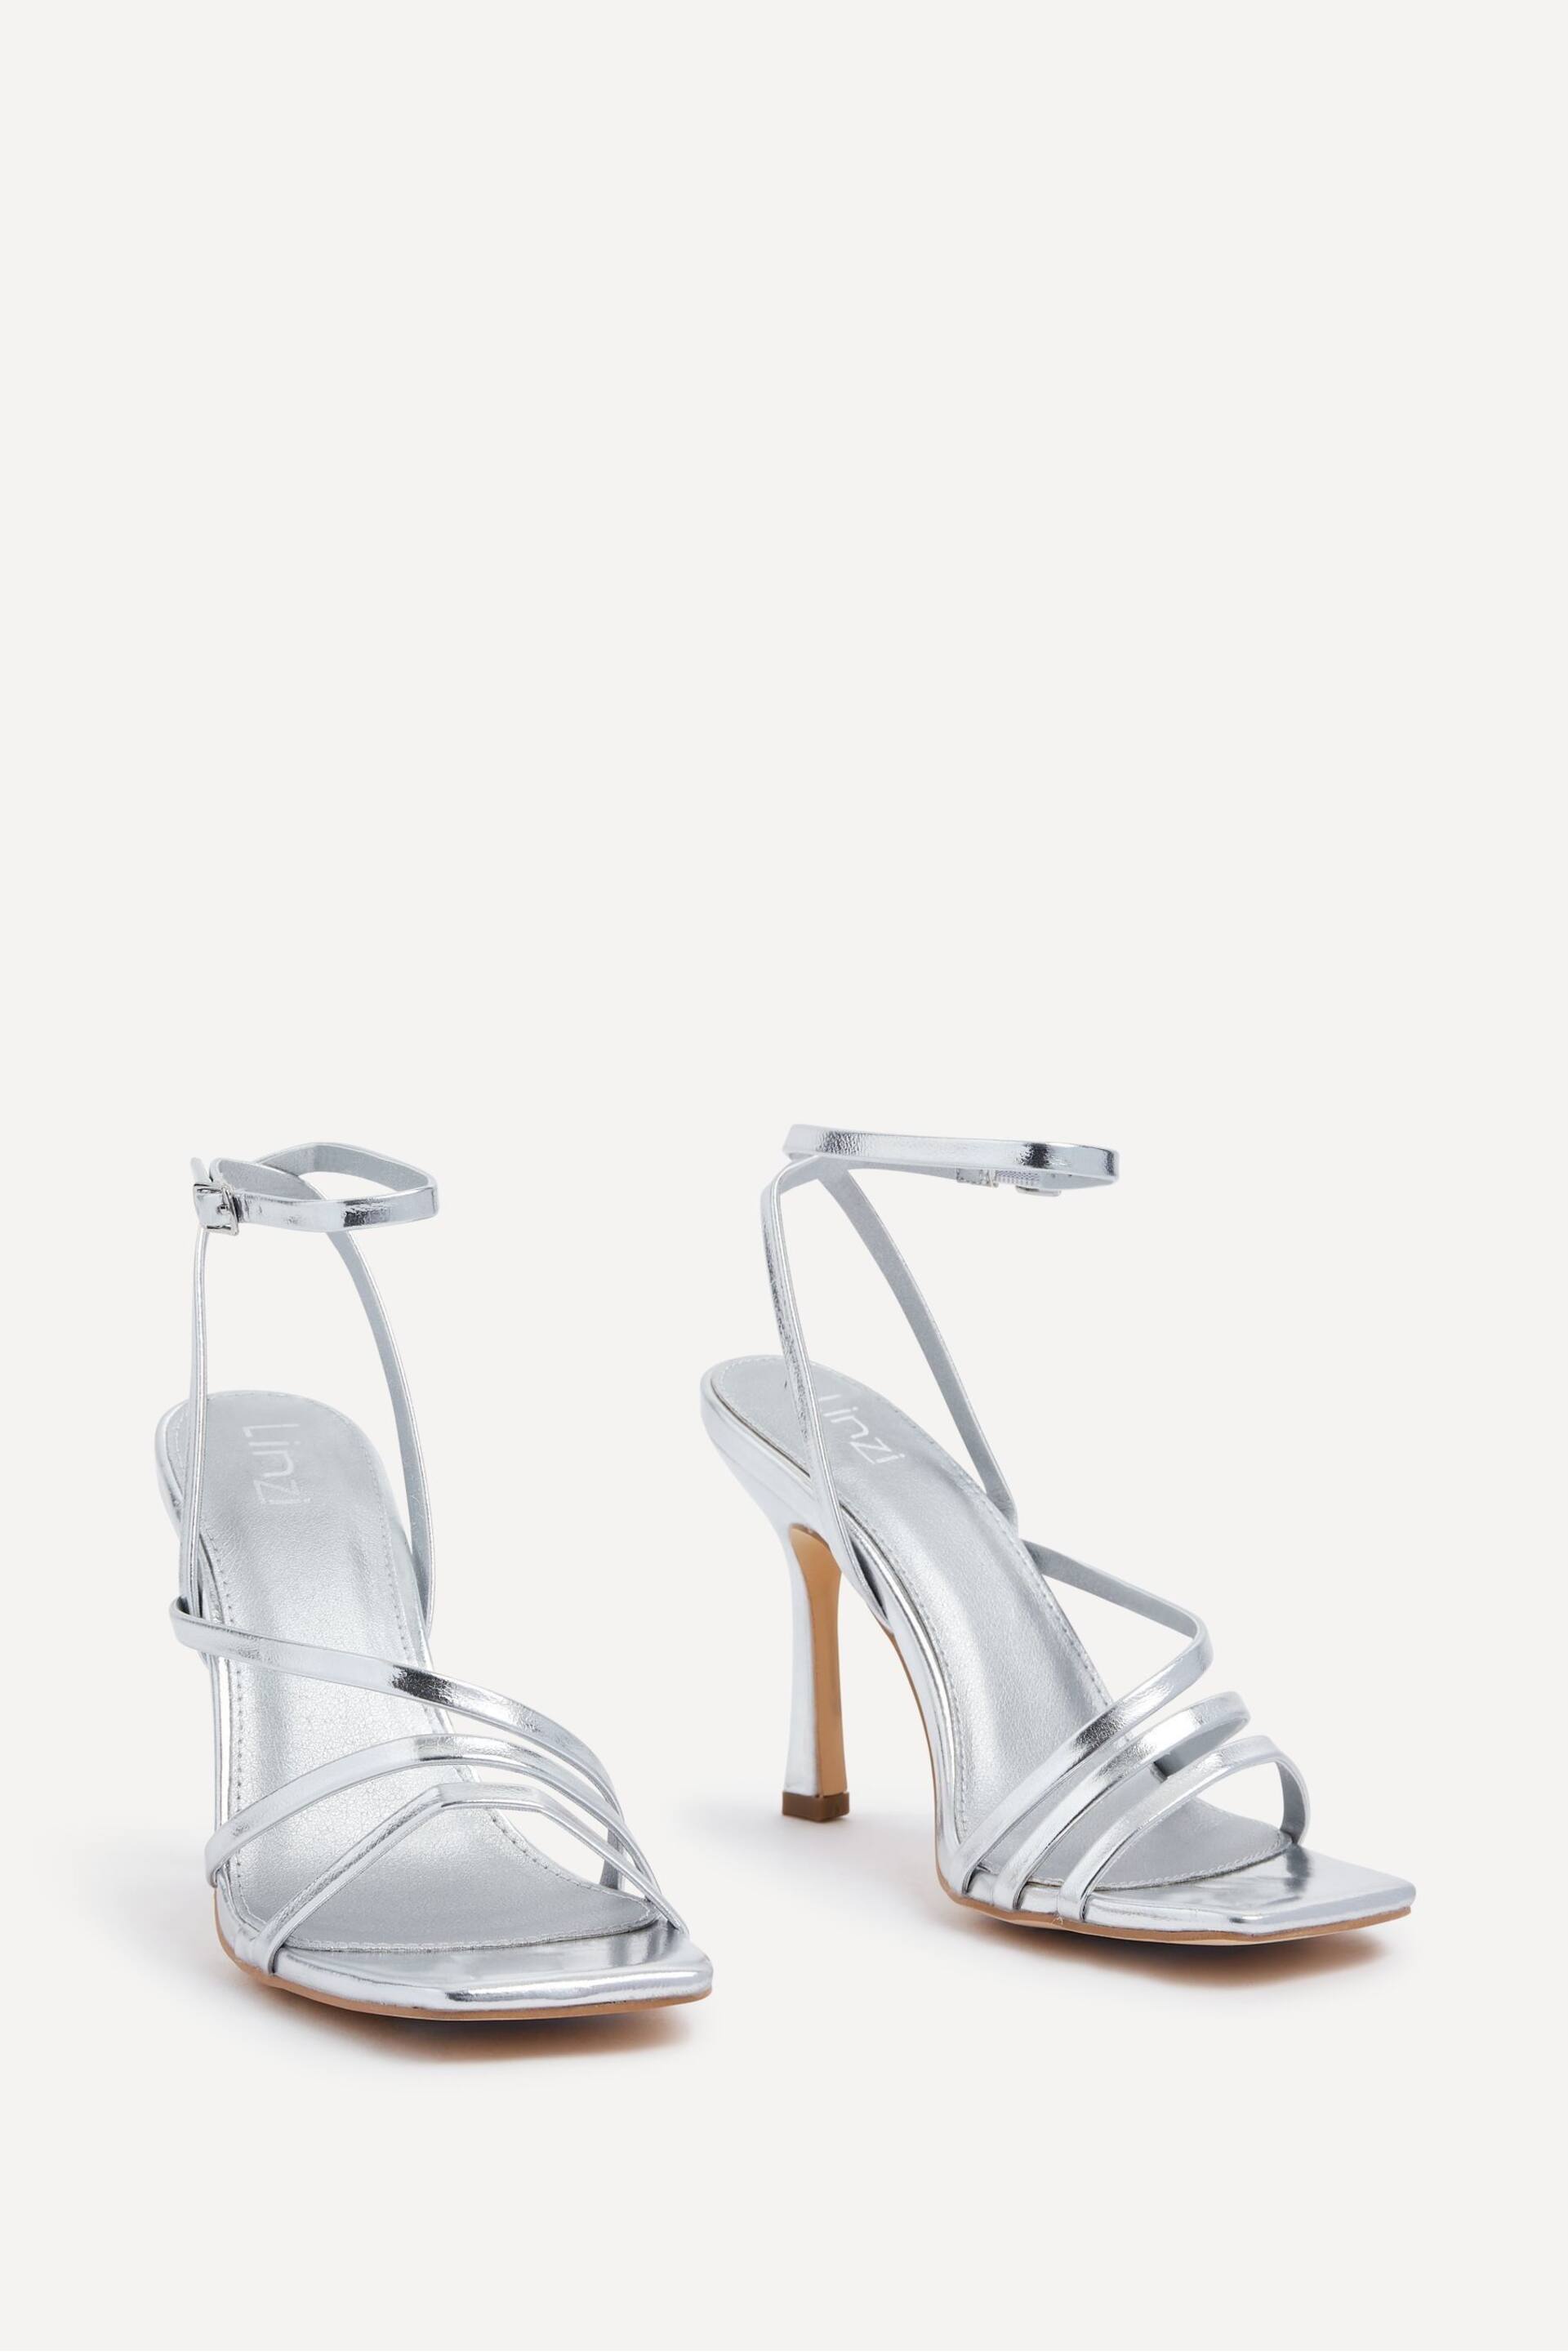 Linzi Silver Scarlett Strappy Heel Sandals With Ankle Strap - Image 3 of 5